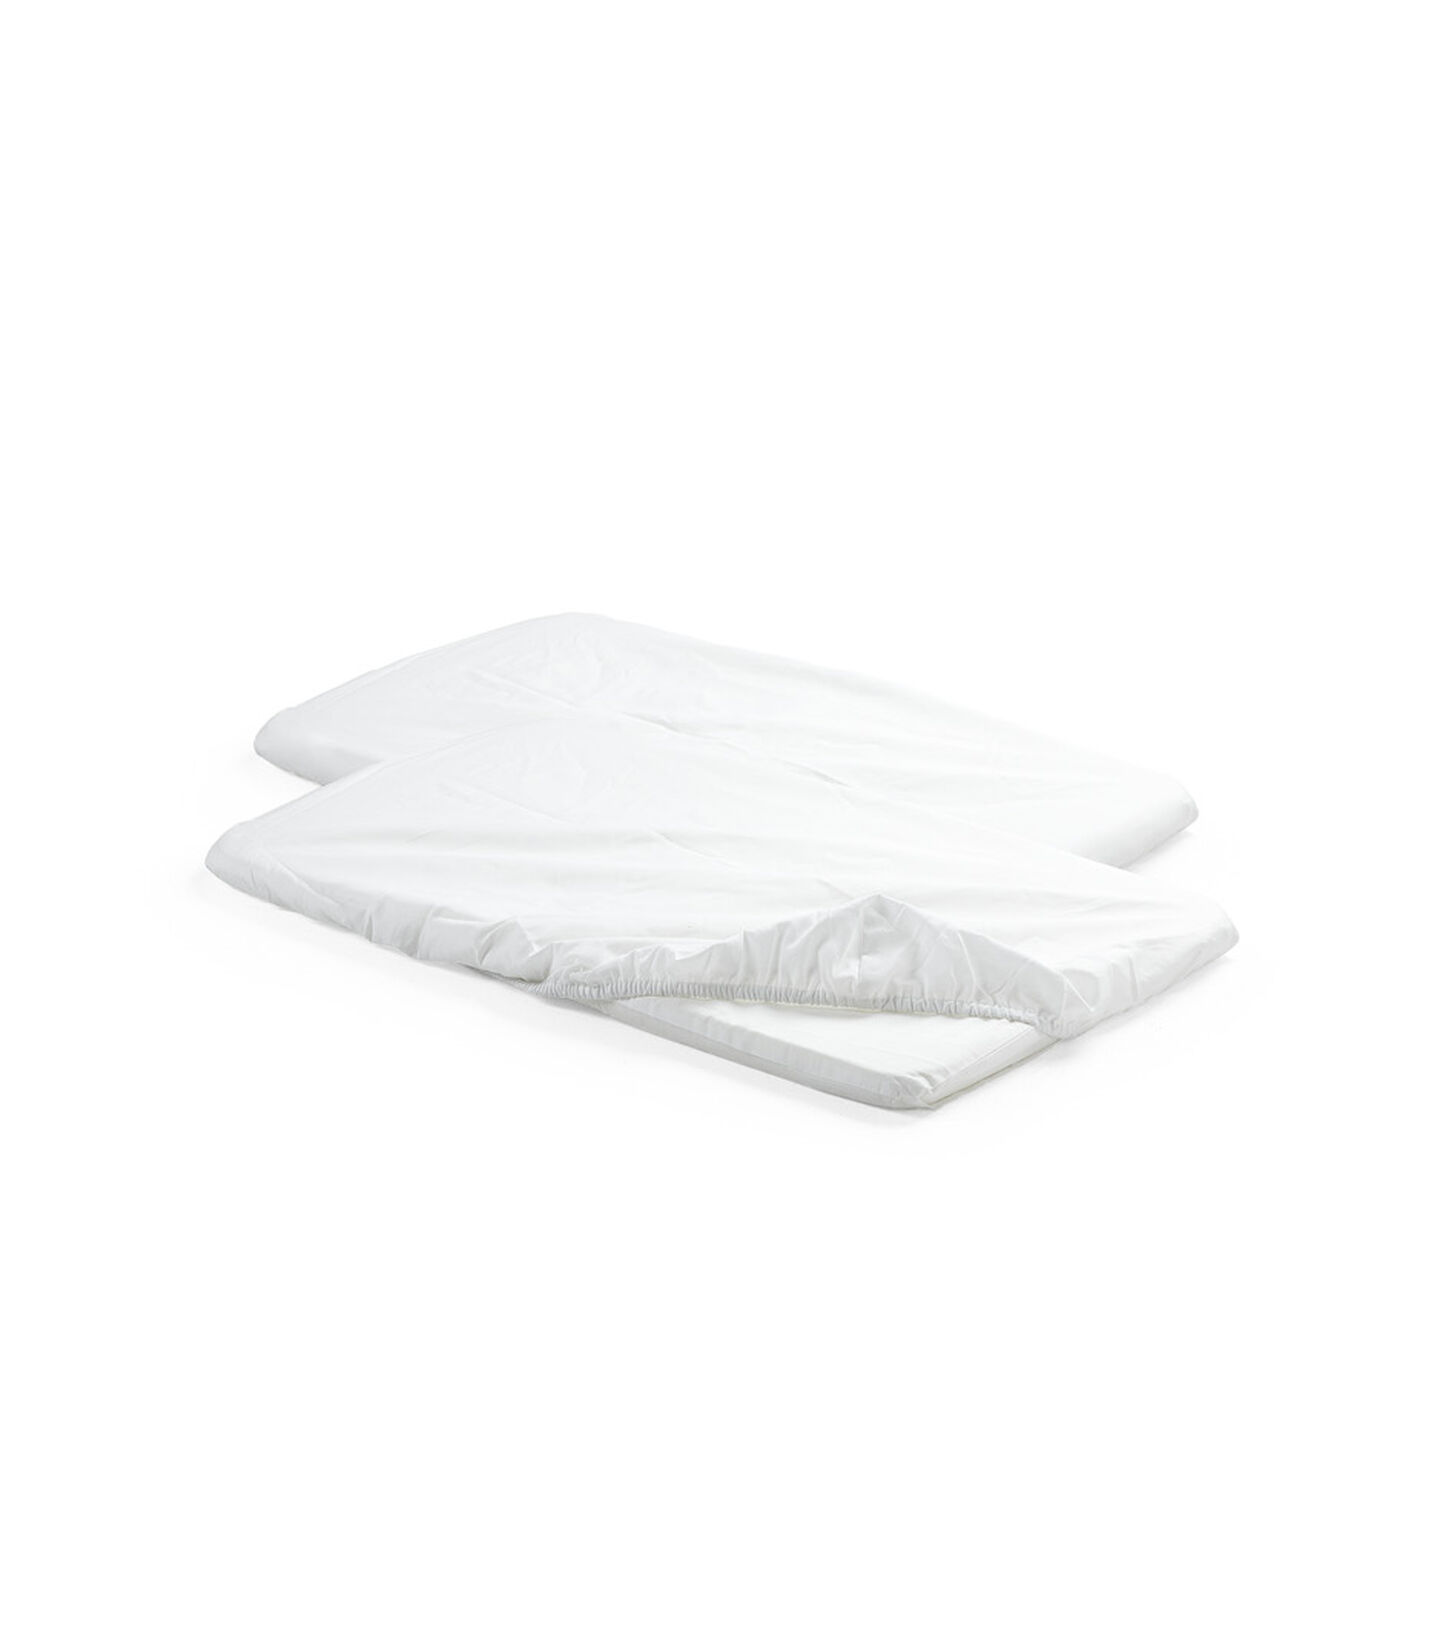 Stokke® Home™ Cradle Mattress with cover, white. view 1